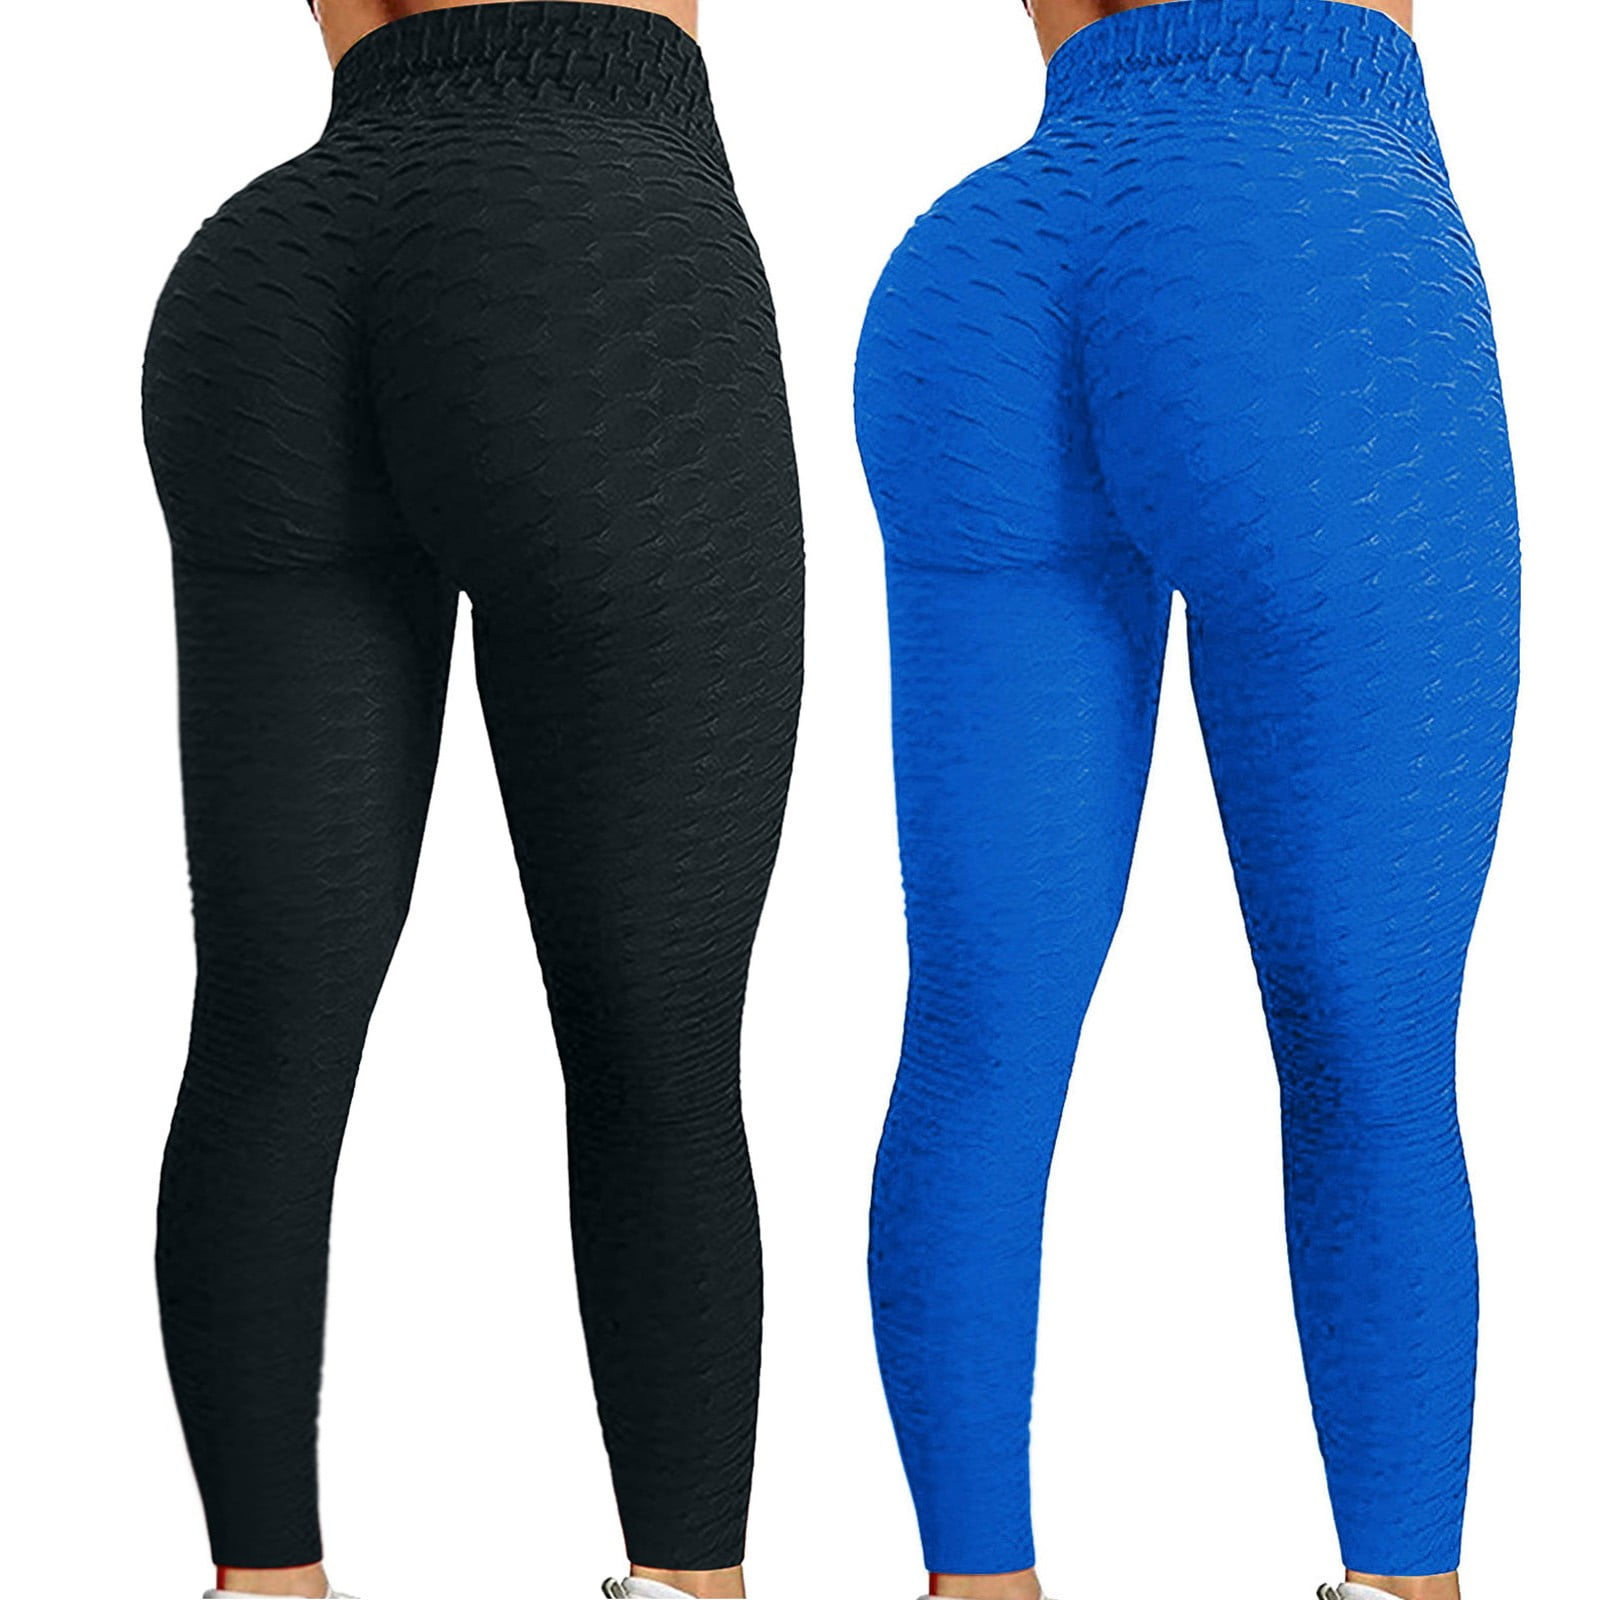 Hot Style Hip Lifting High Waist Fold Fitness Pants Women's Fashion Gym  Apparel Yoga Pant $3.5 - Wholesale China Yoga Pant at Factory Prices from  Polywell Supply Management Co., Ltd